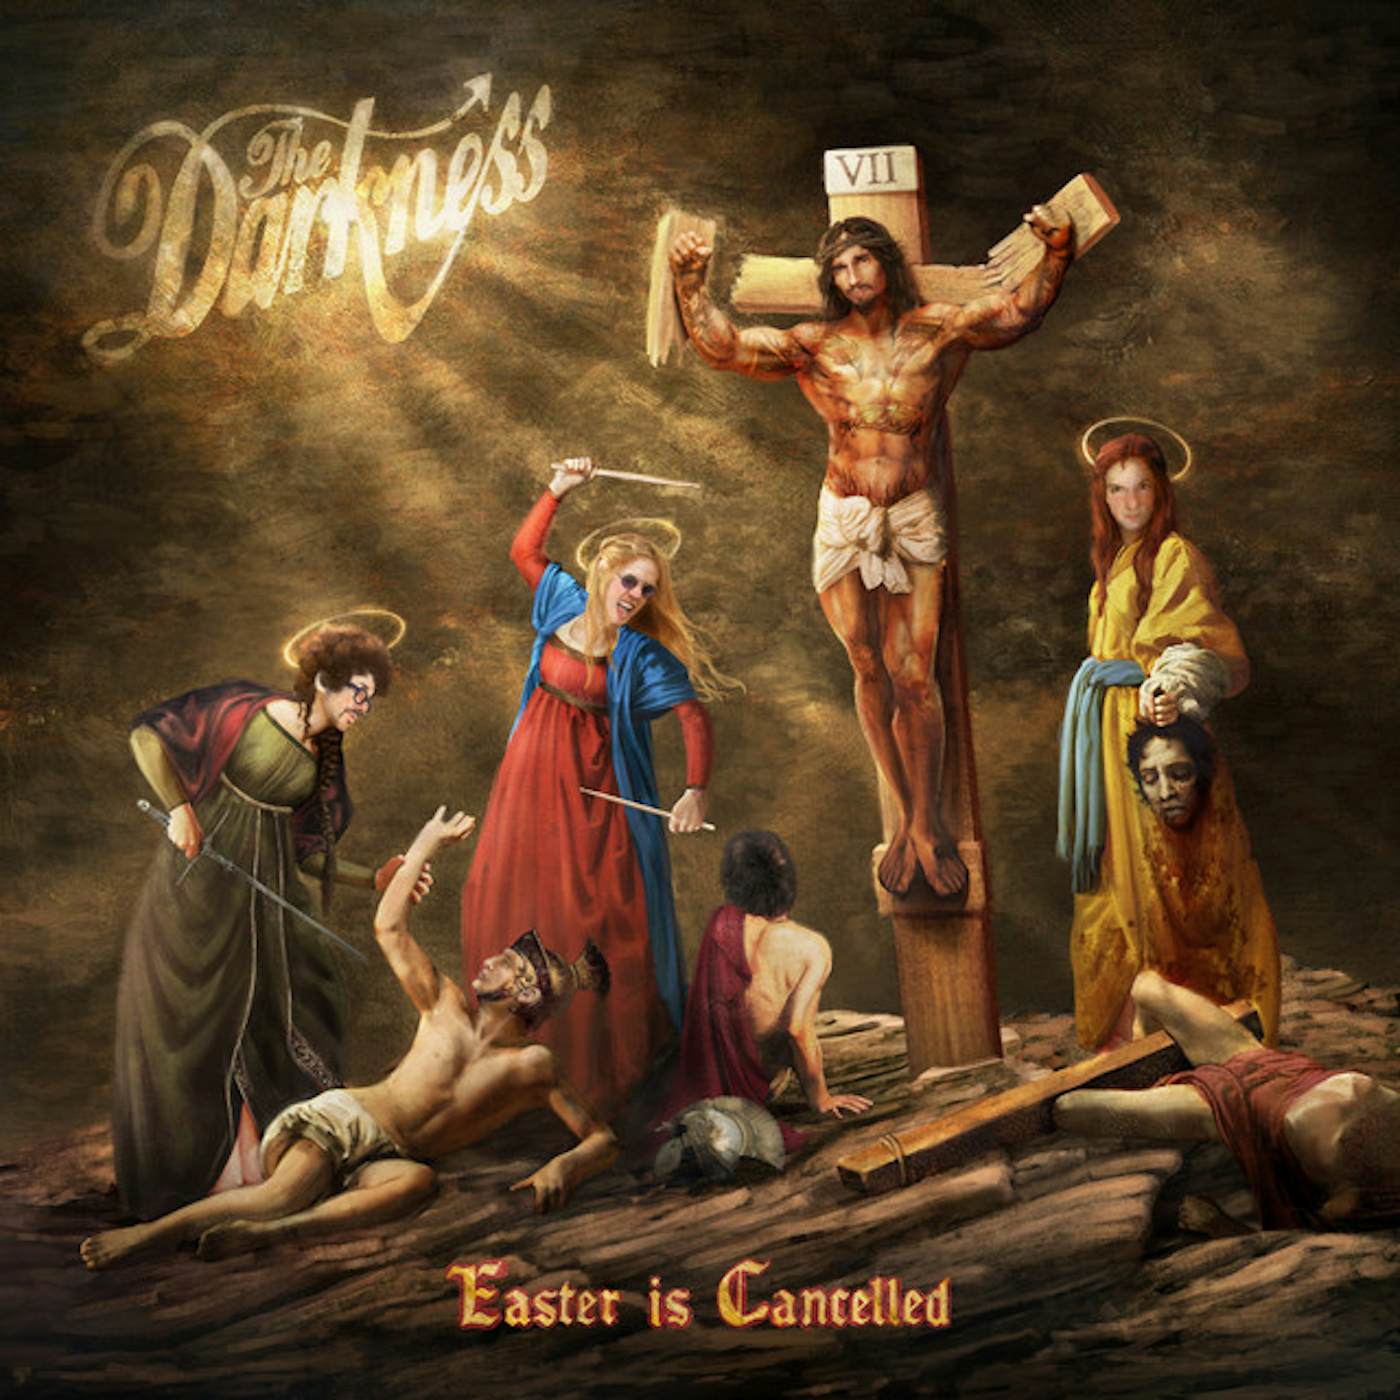 The Darkness Easter is Cancelled Vinyl Record